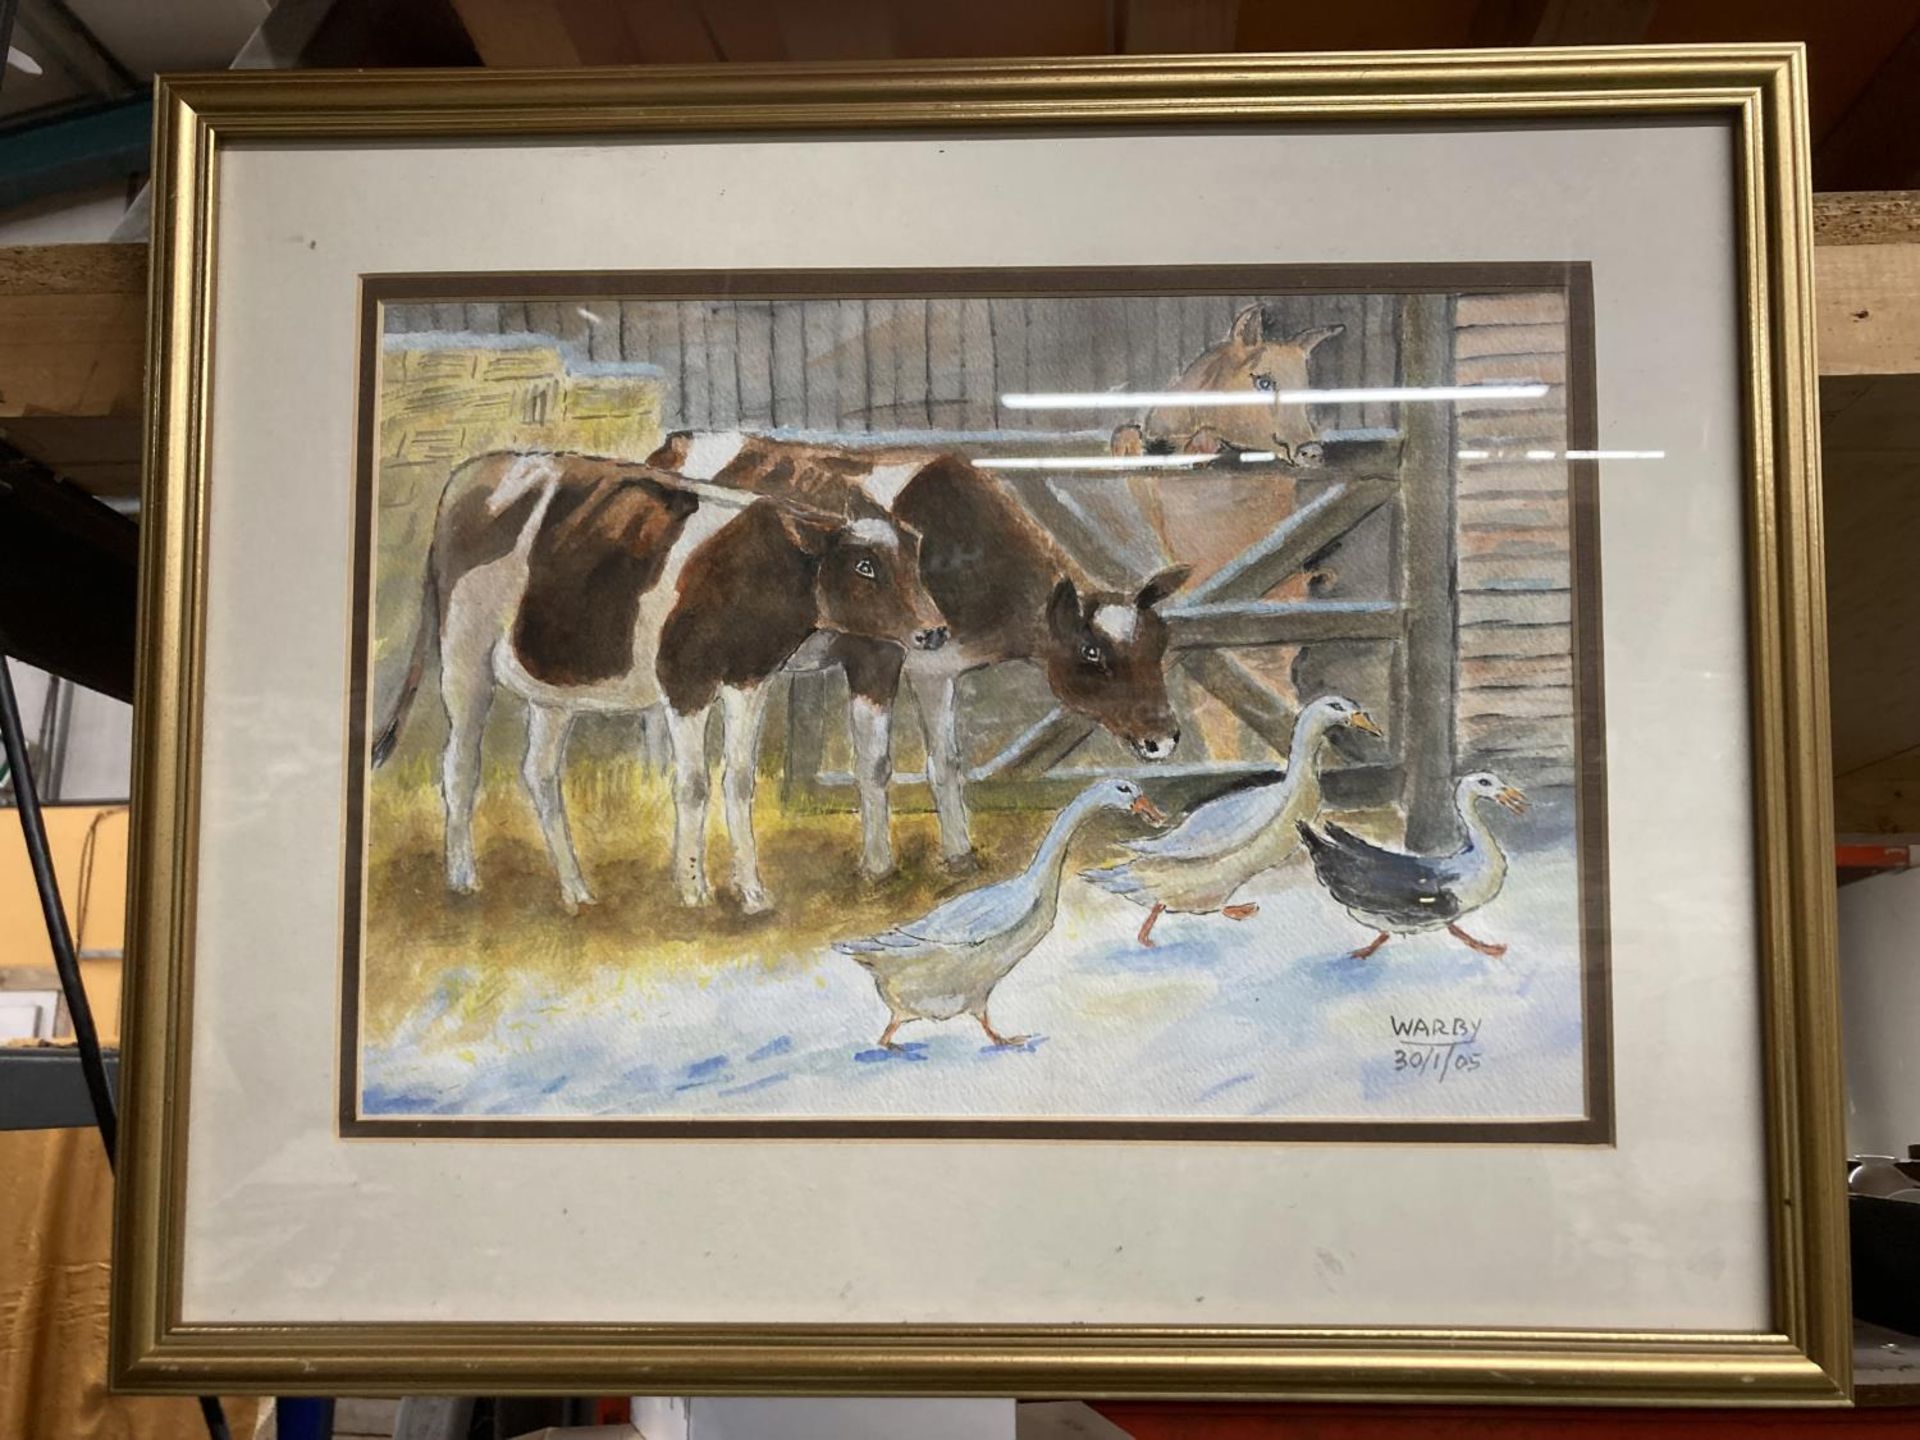 A FRAMED WATERCOLOUR PAINTING OF A FARMYARD SCENE WITH COWS, PIGS AND GEESE, SIGNED WARBY 30/01/05